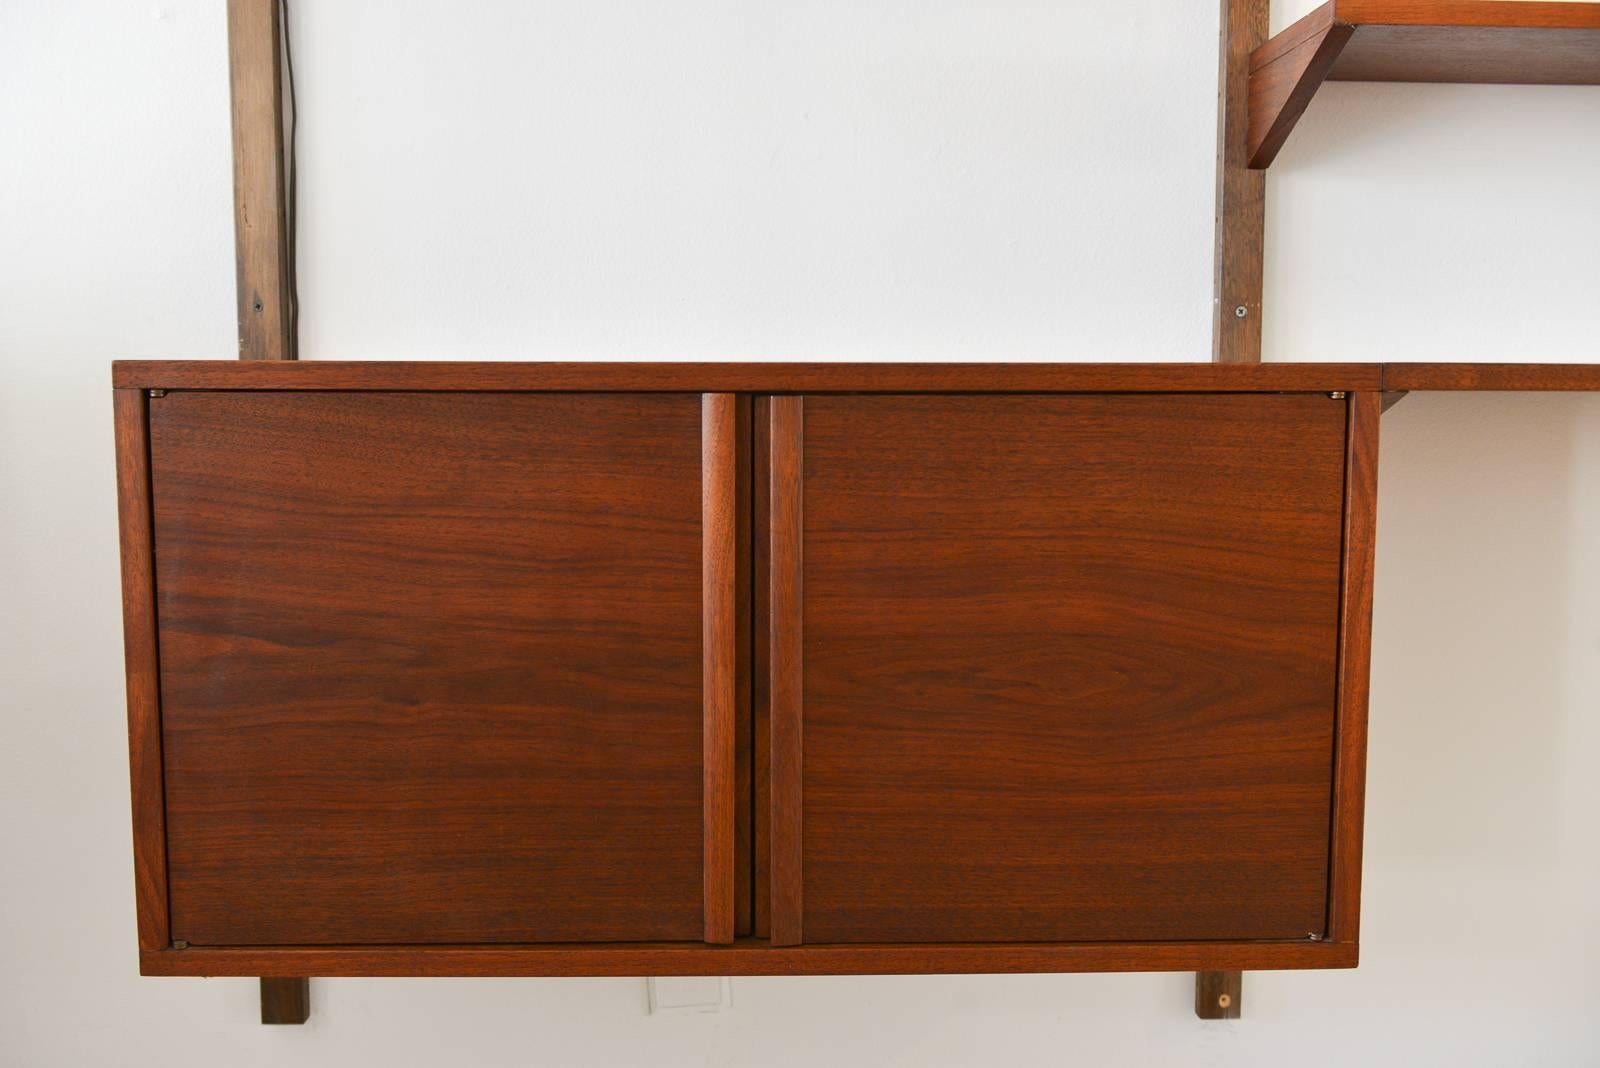 Glass Walnut 3 Bay Wall Unit with Lighted Cabinets, circa 1970